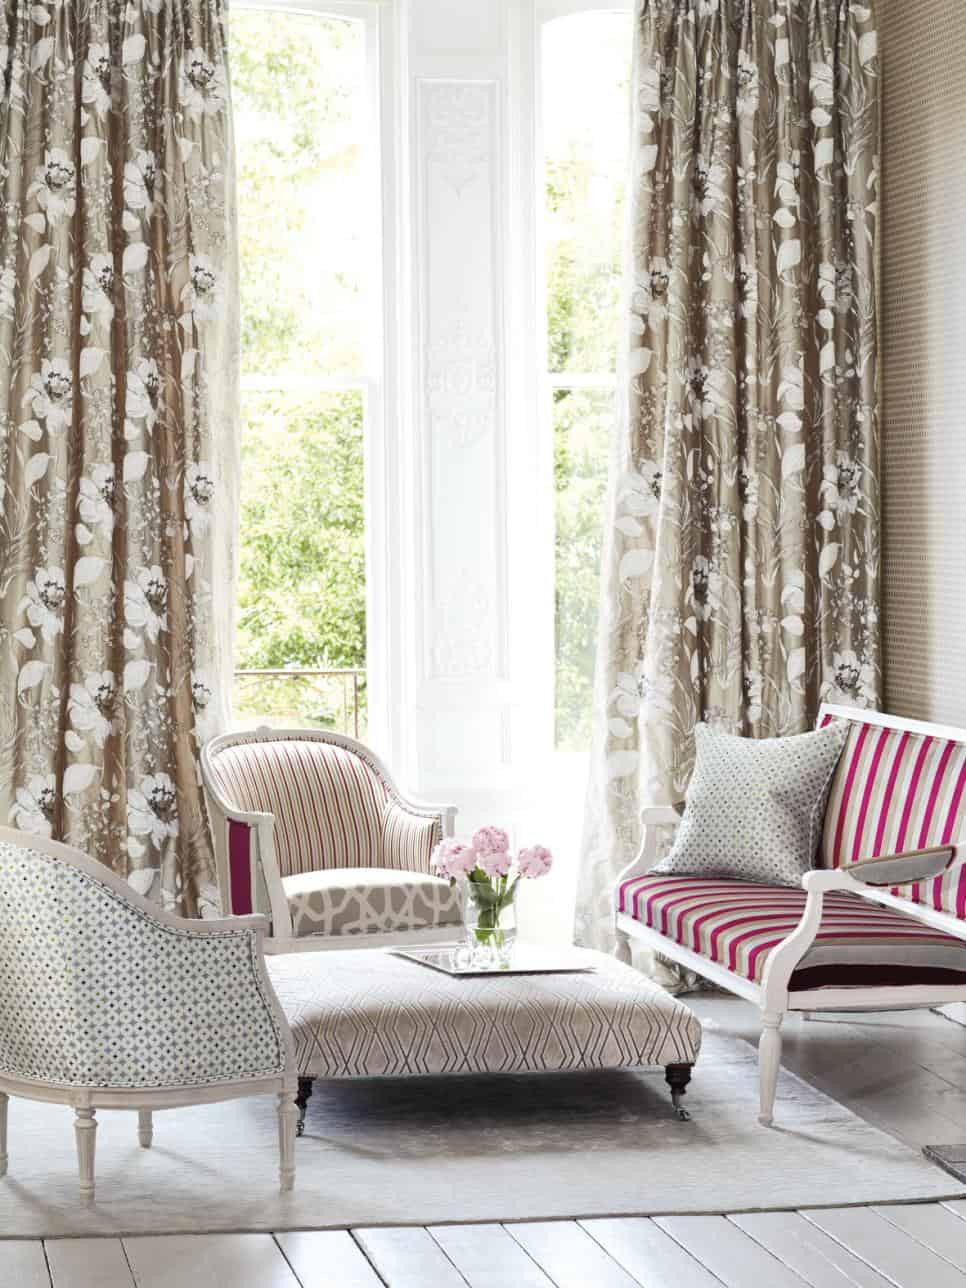 Living Room Drapes Ideas
 Trendy Ideas for Small Living Room Space